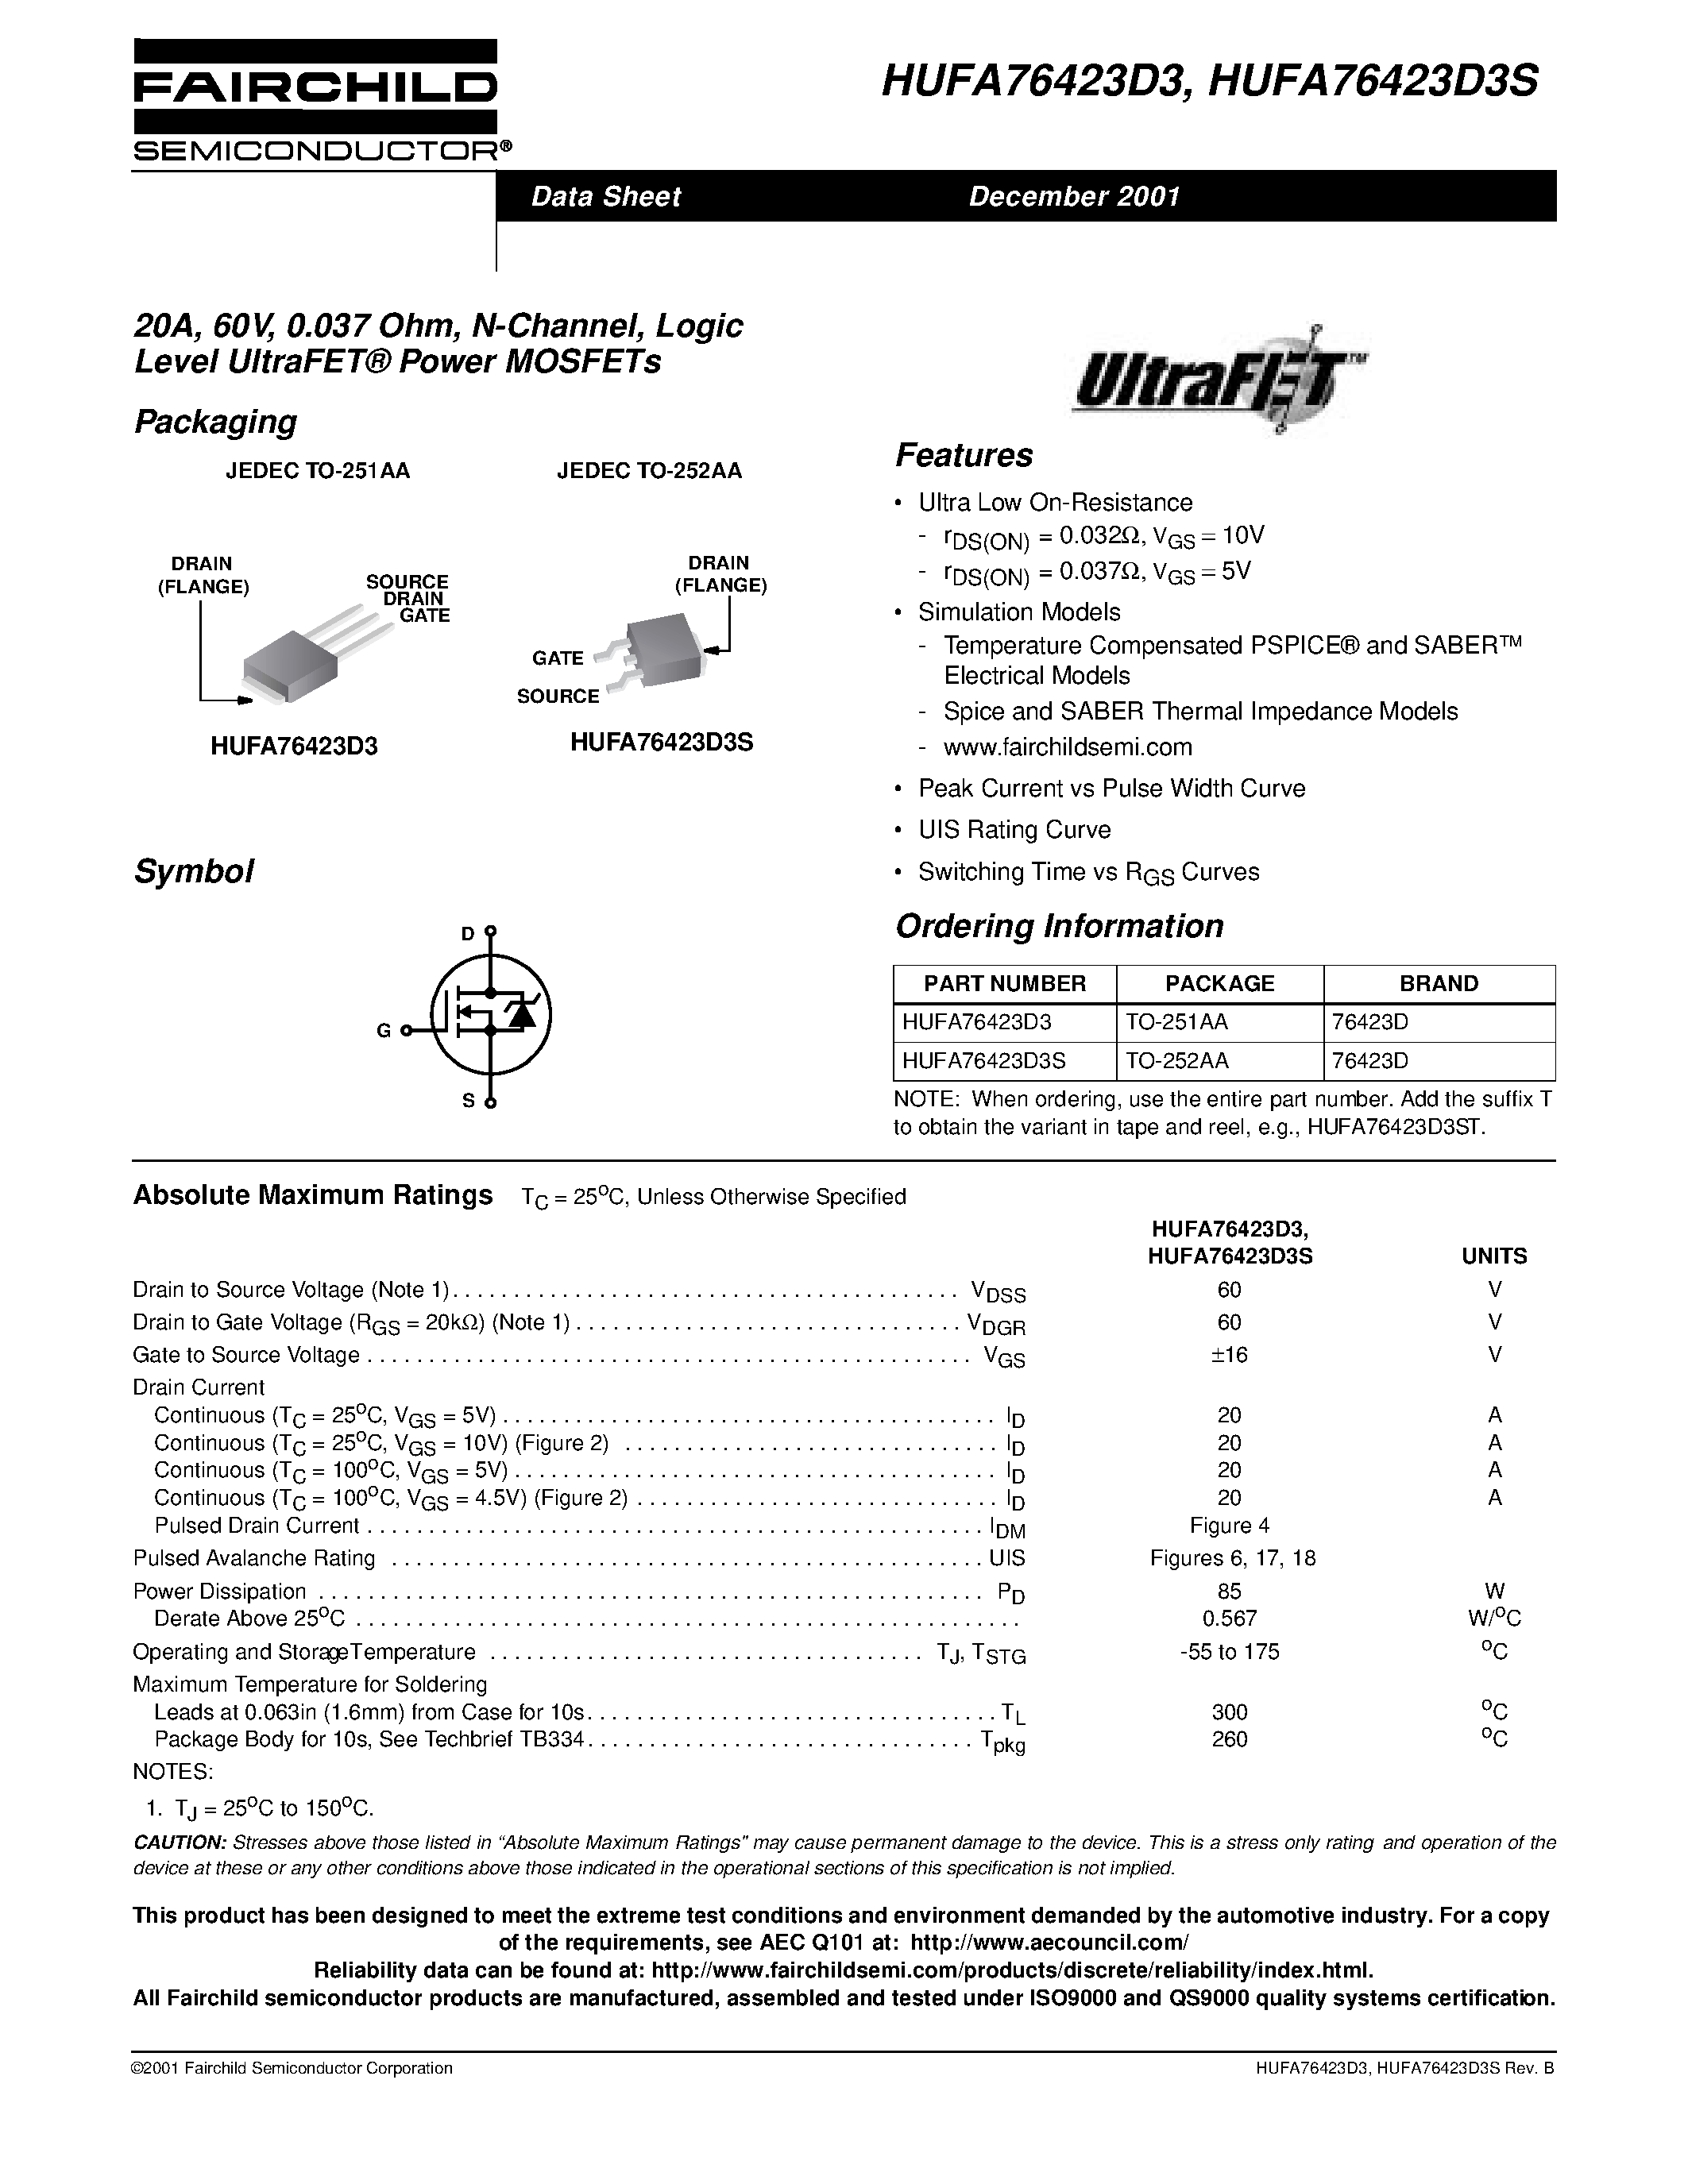 Datasheet HUFA76423D3 - 20A/ 60V/ 0.037 Ohm/ N-Channel/ Logic Level UltraFET Power MOSFETs page 1